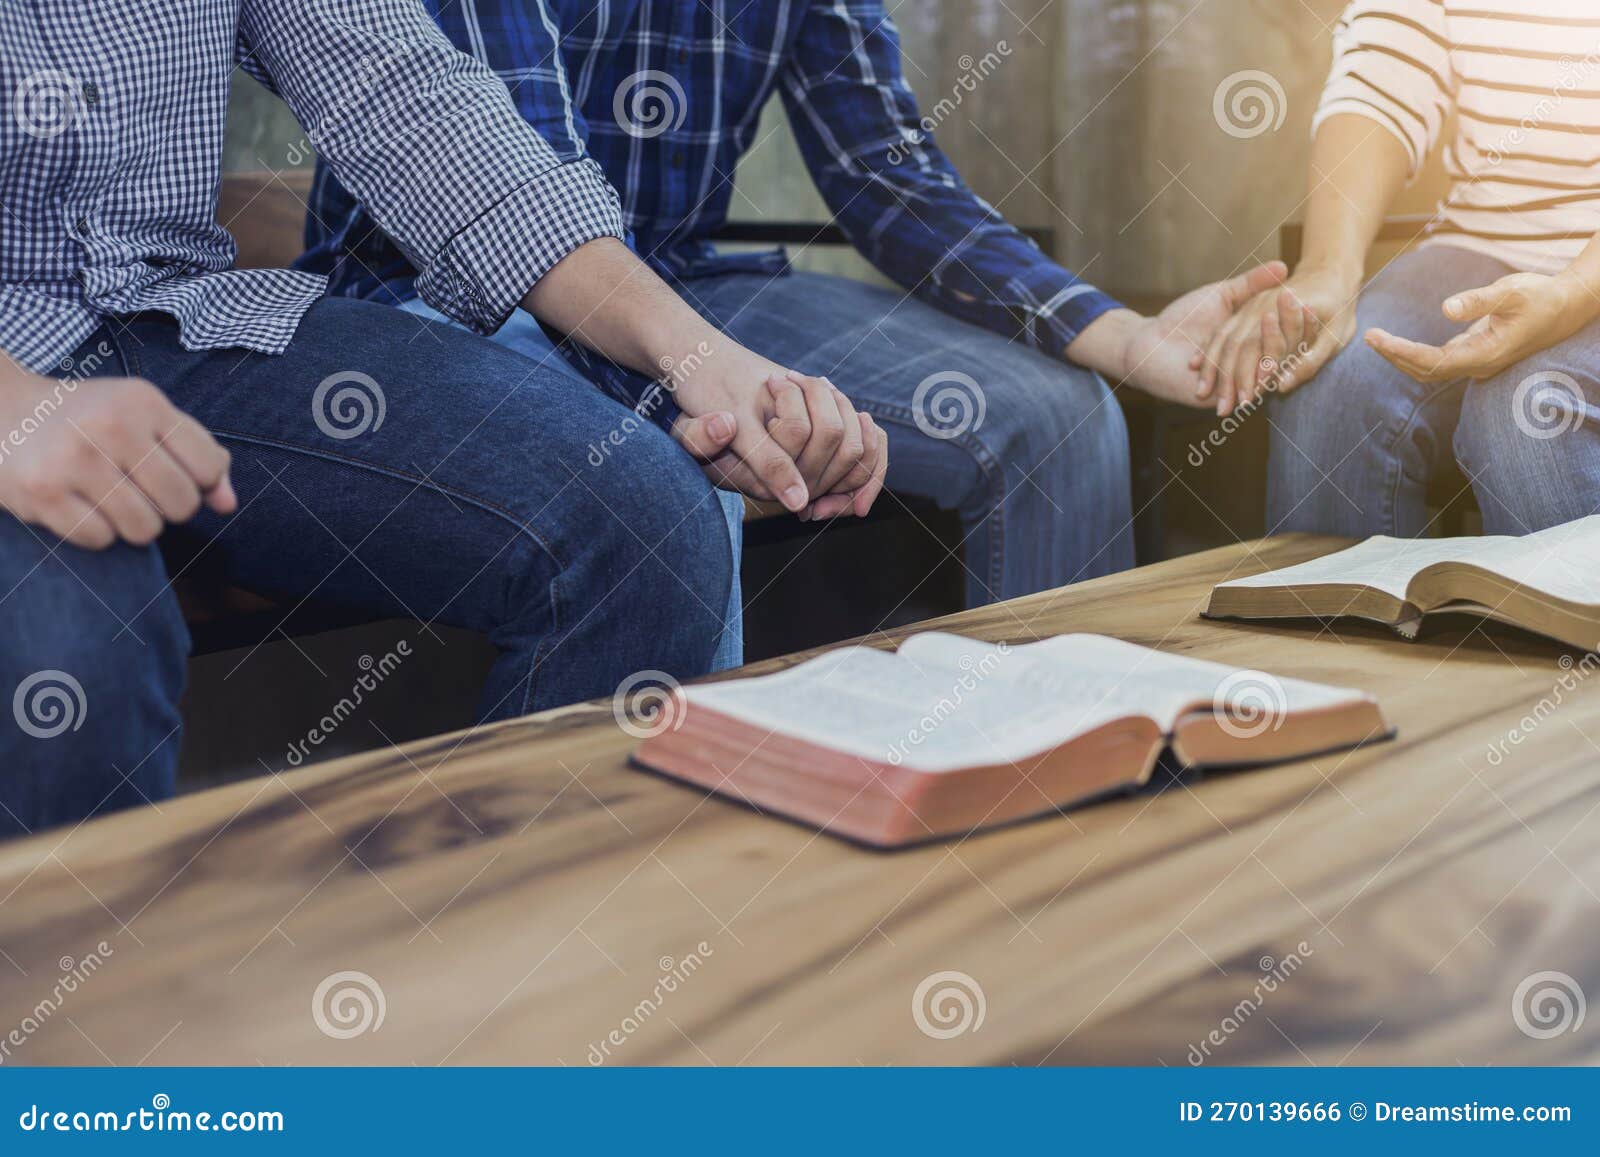 a christian group holding hands and together over blurred bible on wooden table, fellowship or bible study concept